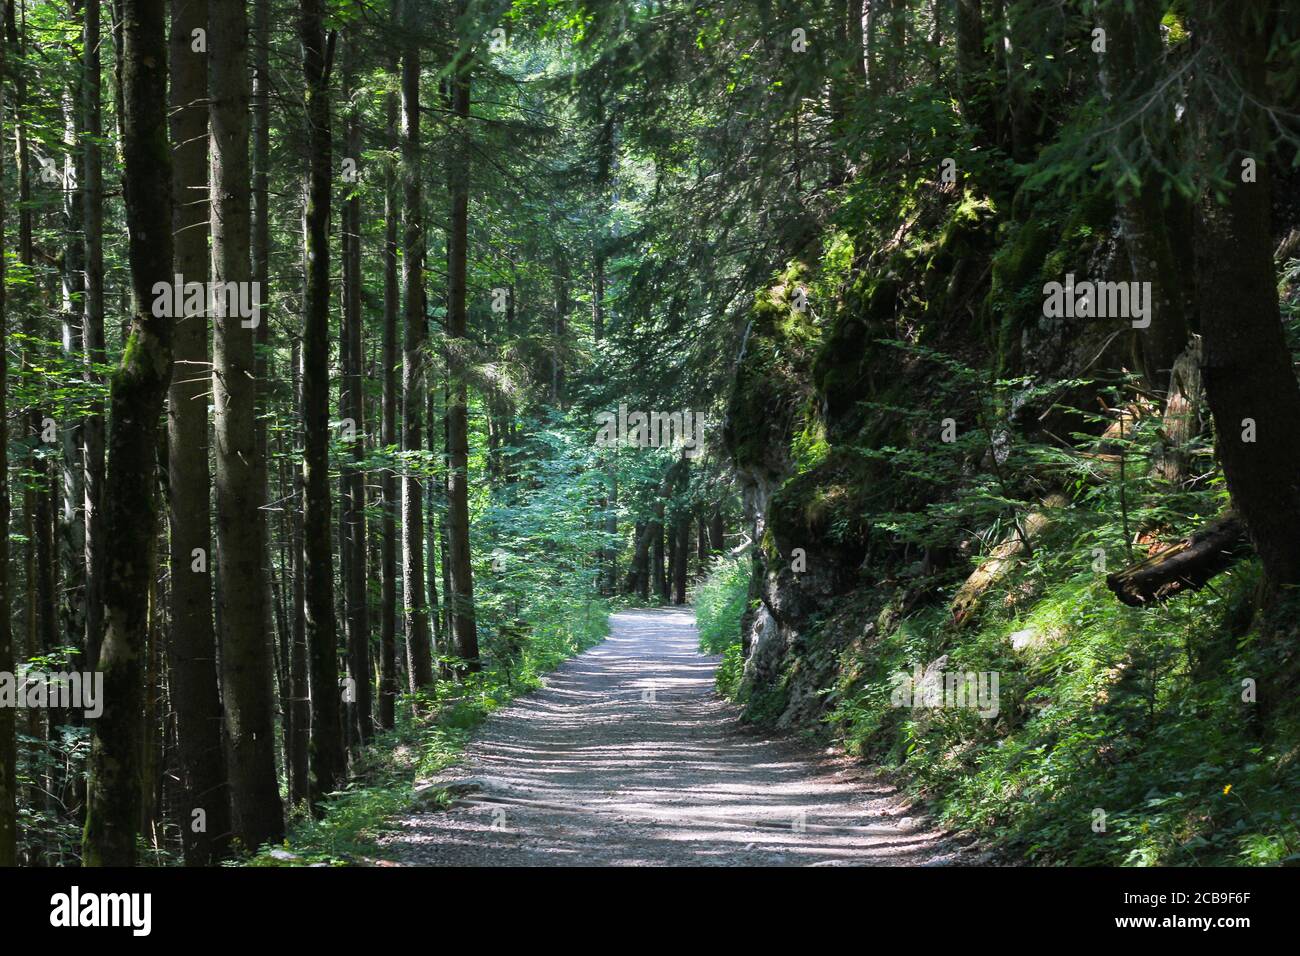 Forest path in sunlight, german landscape. Stock Photo